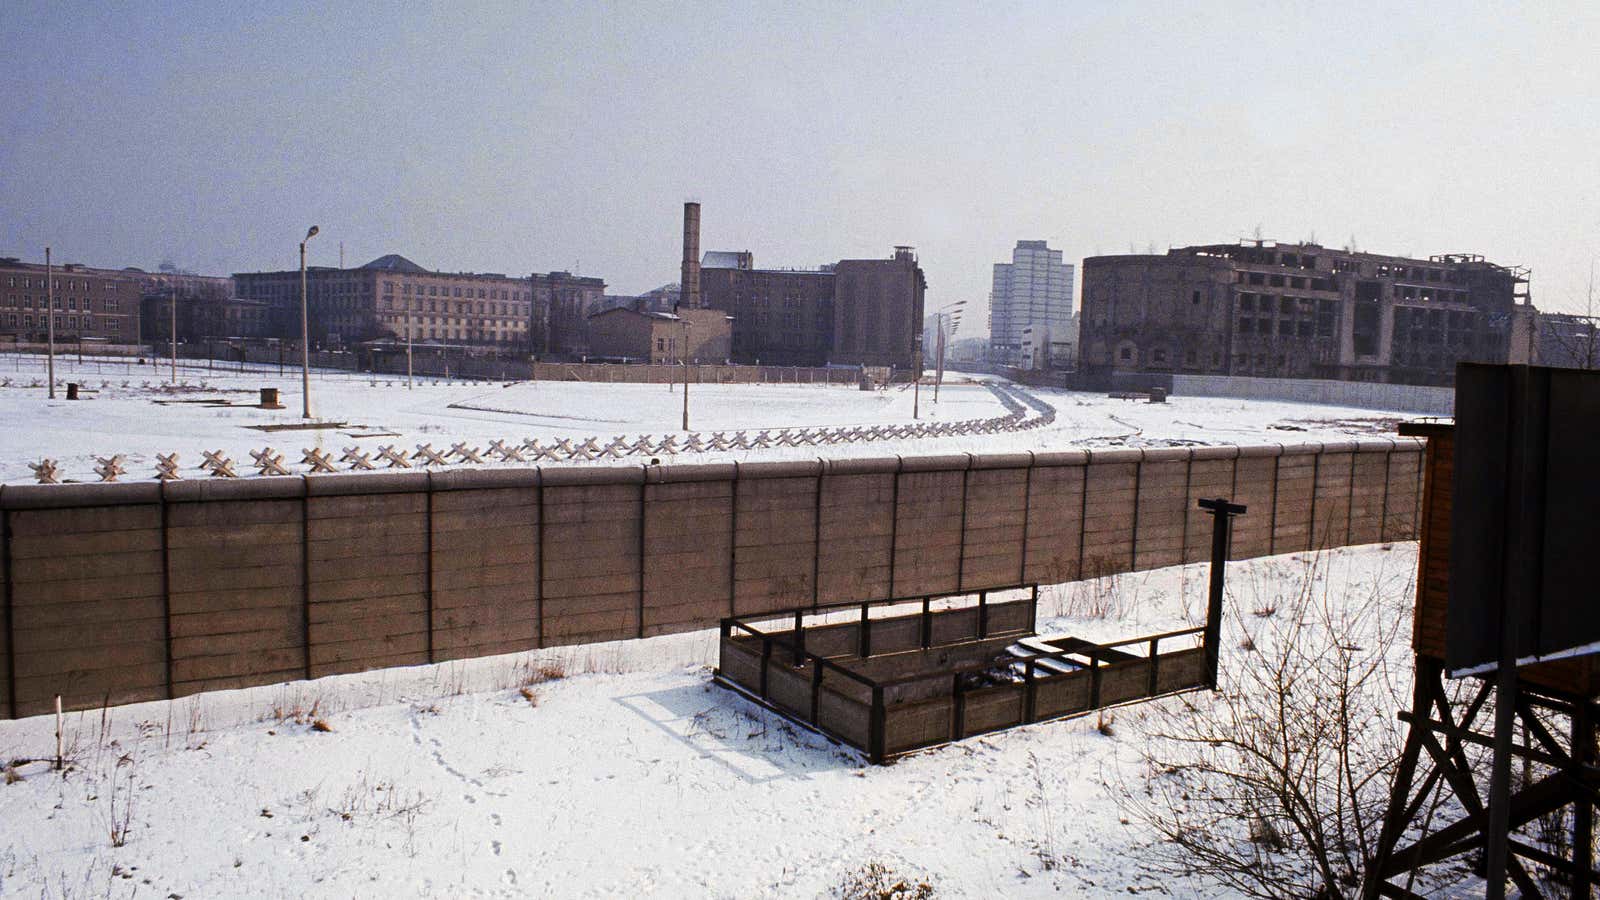 The Berlin Wall was built 55 years ago today, and it should remind us that walls don’t work